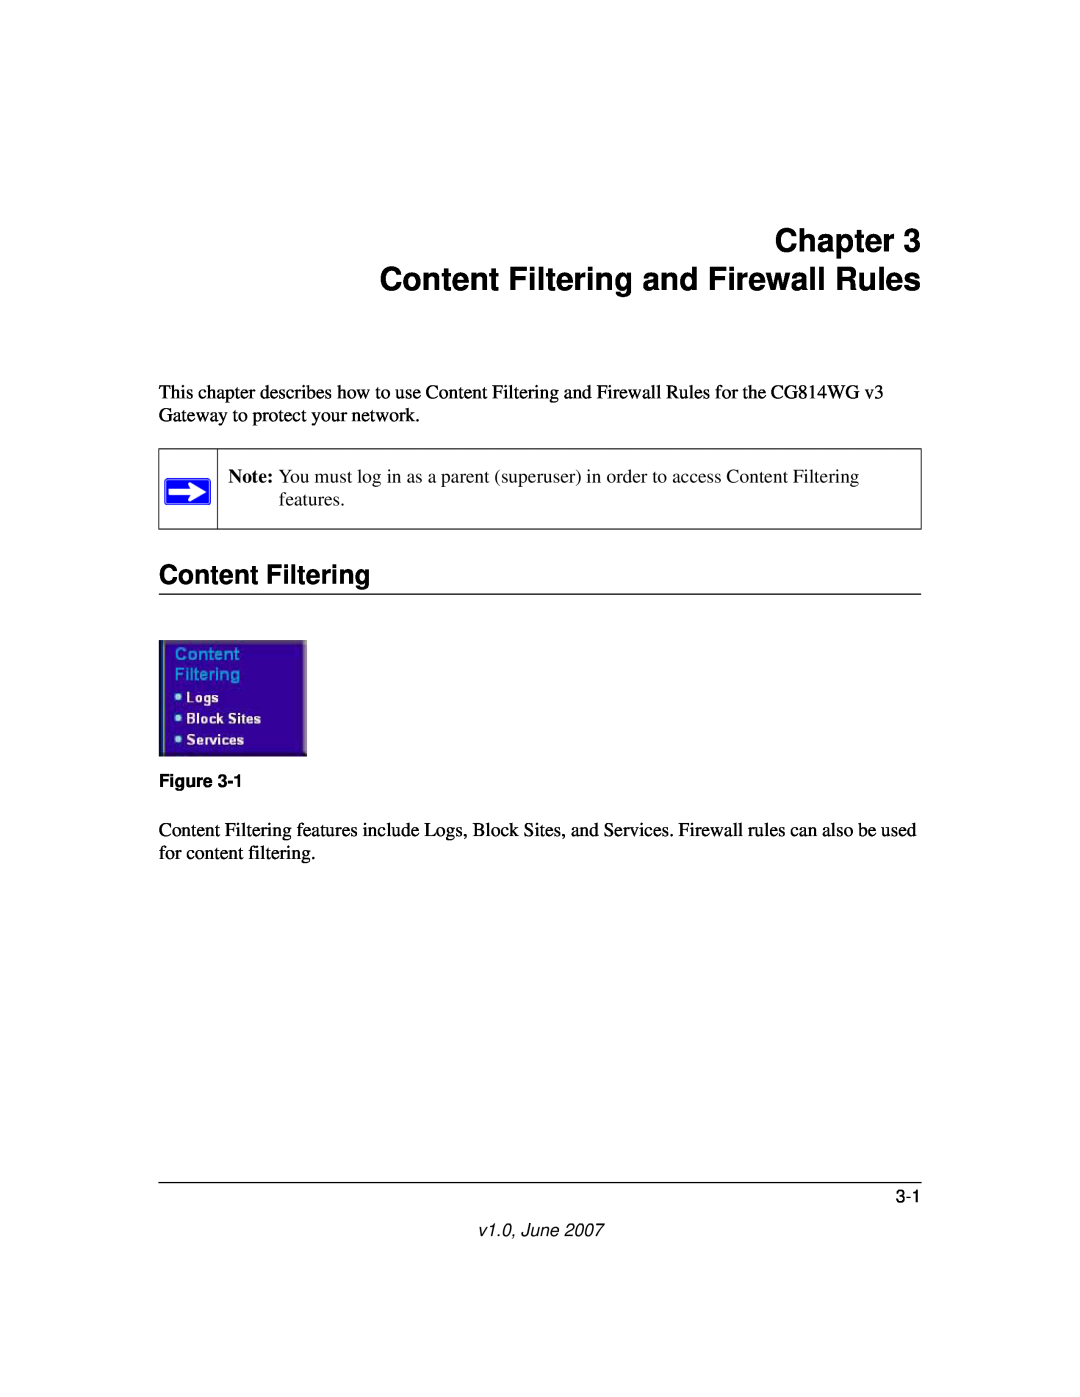 NETGEAR CG814WG V3 manual Chapter Content Filtering and Firewall Rules 